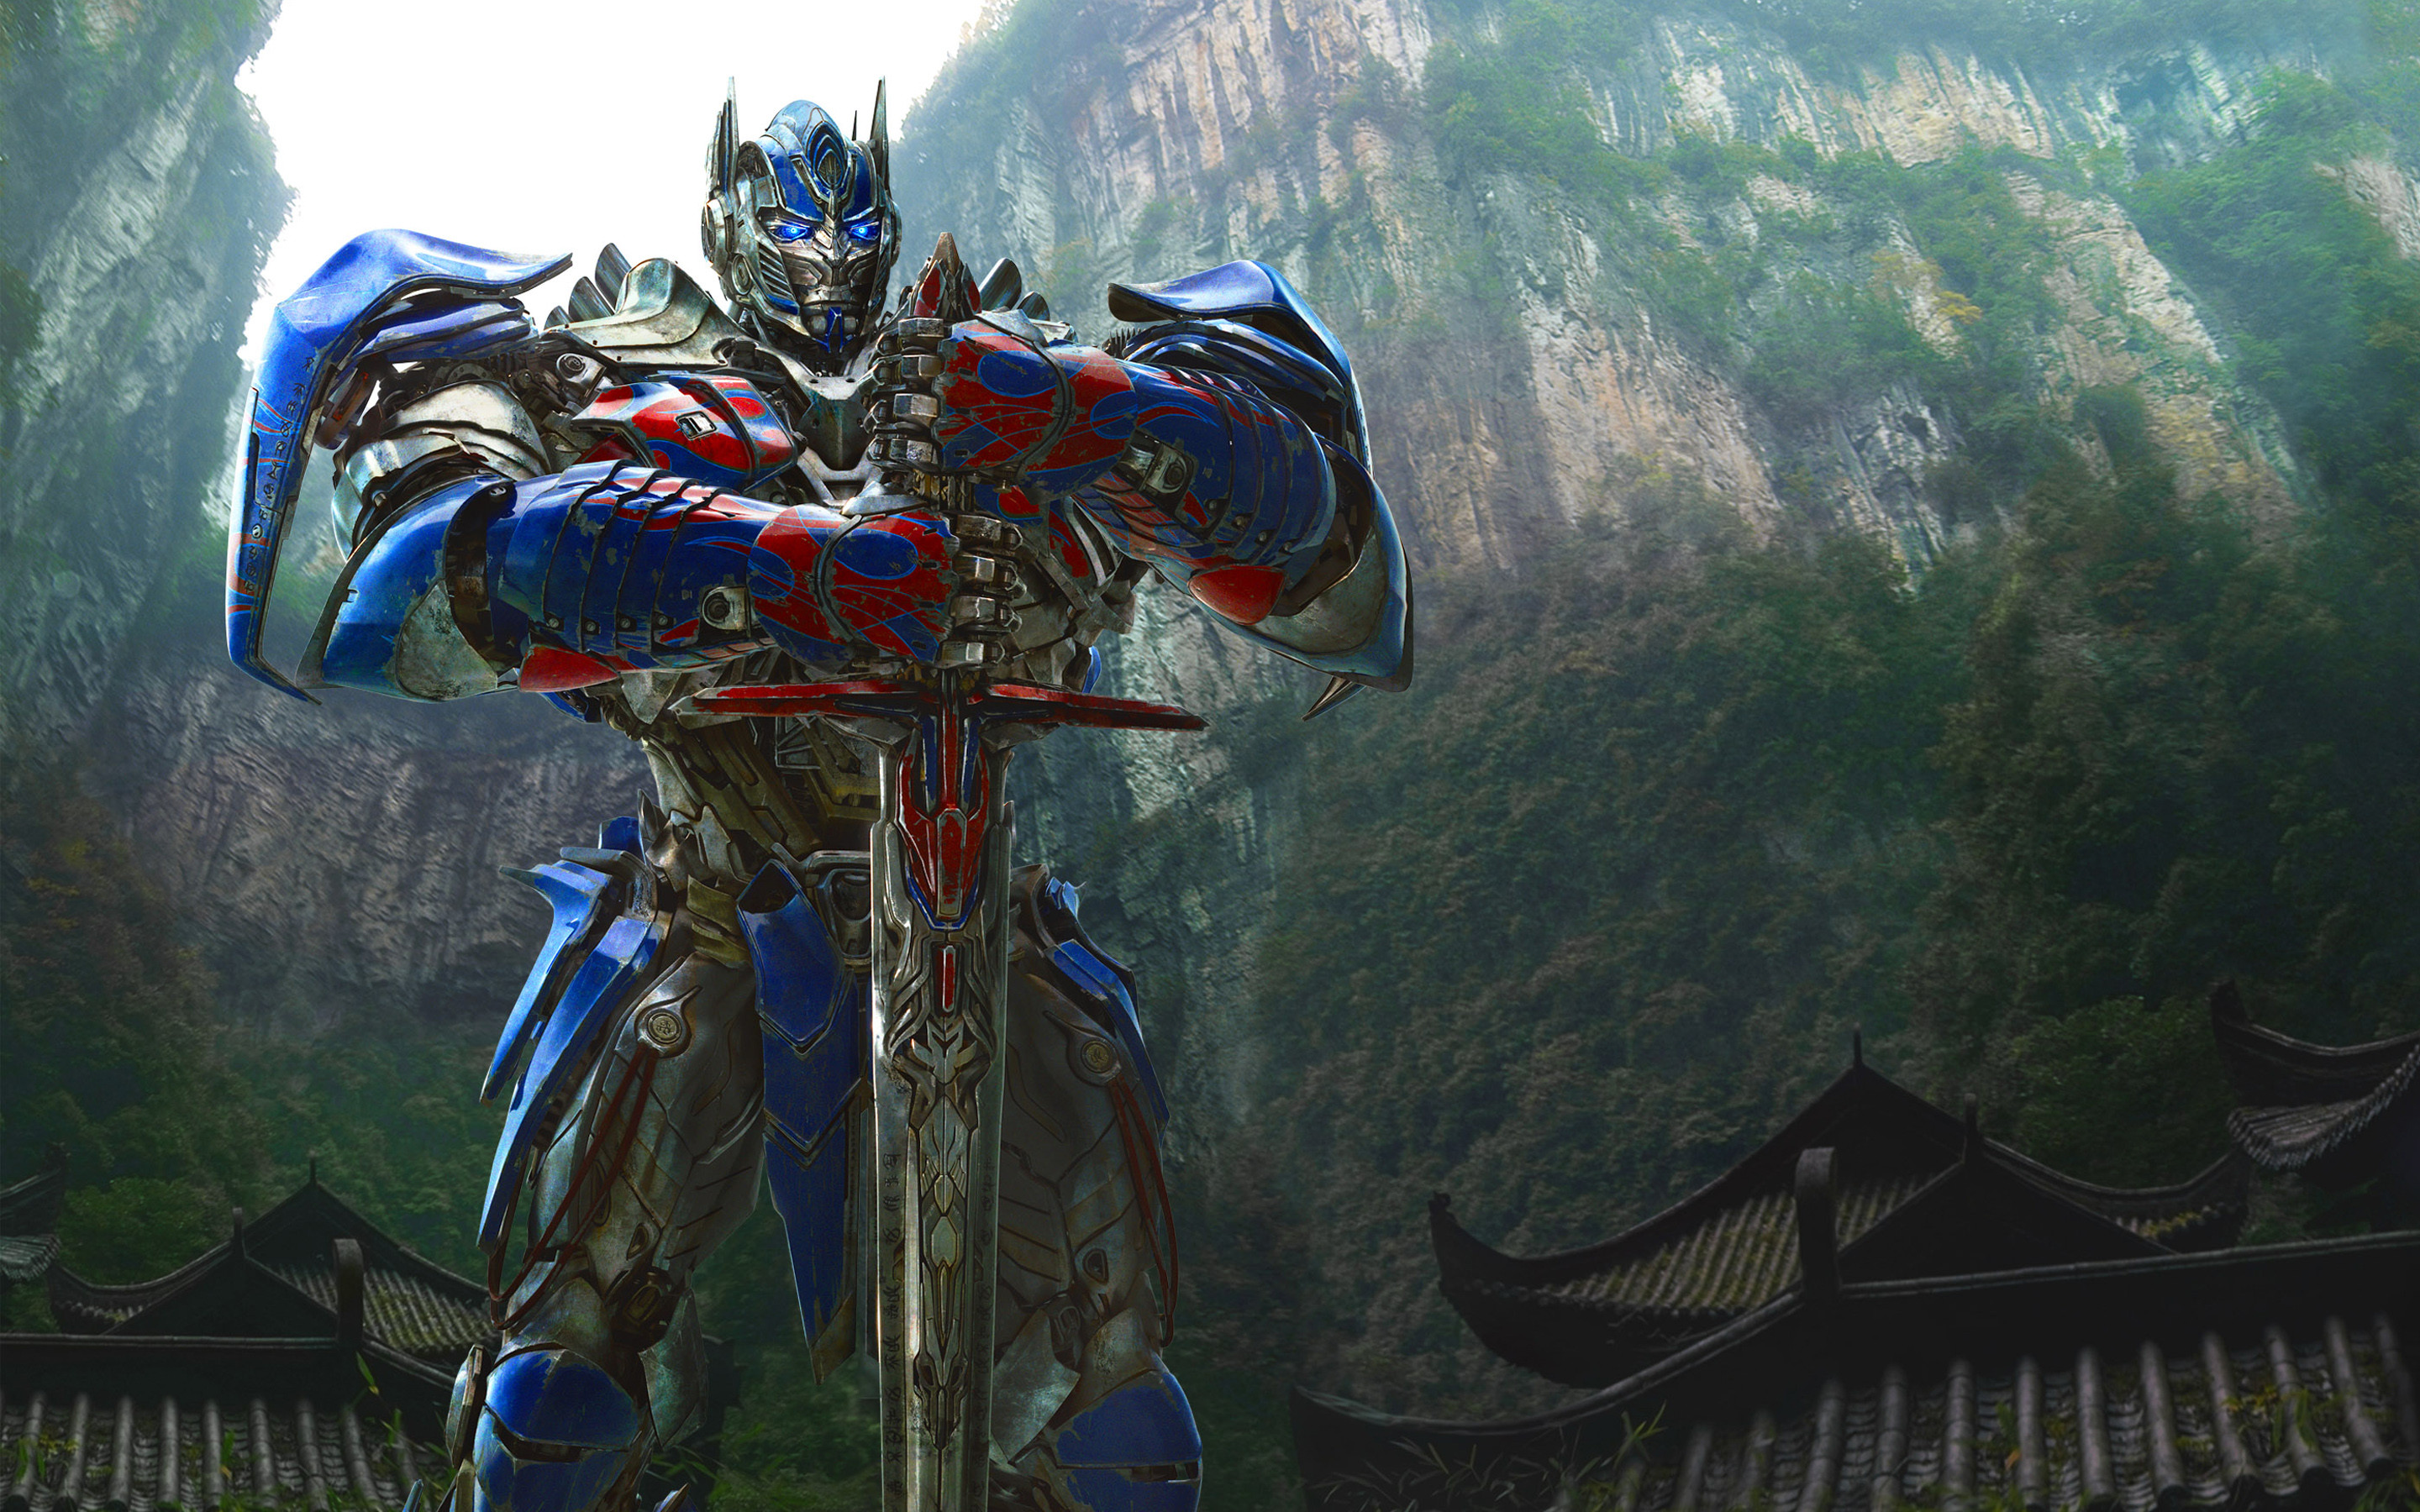 hd images of transformers